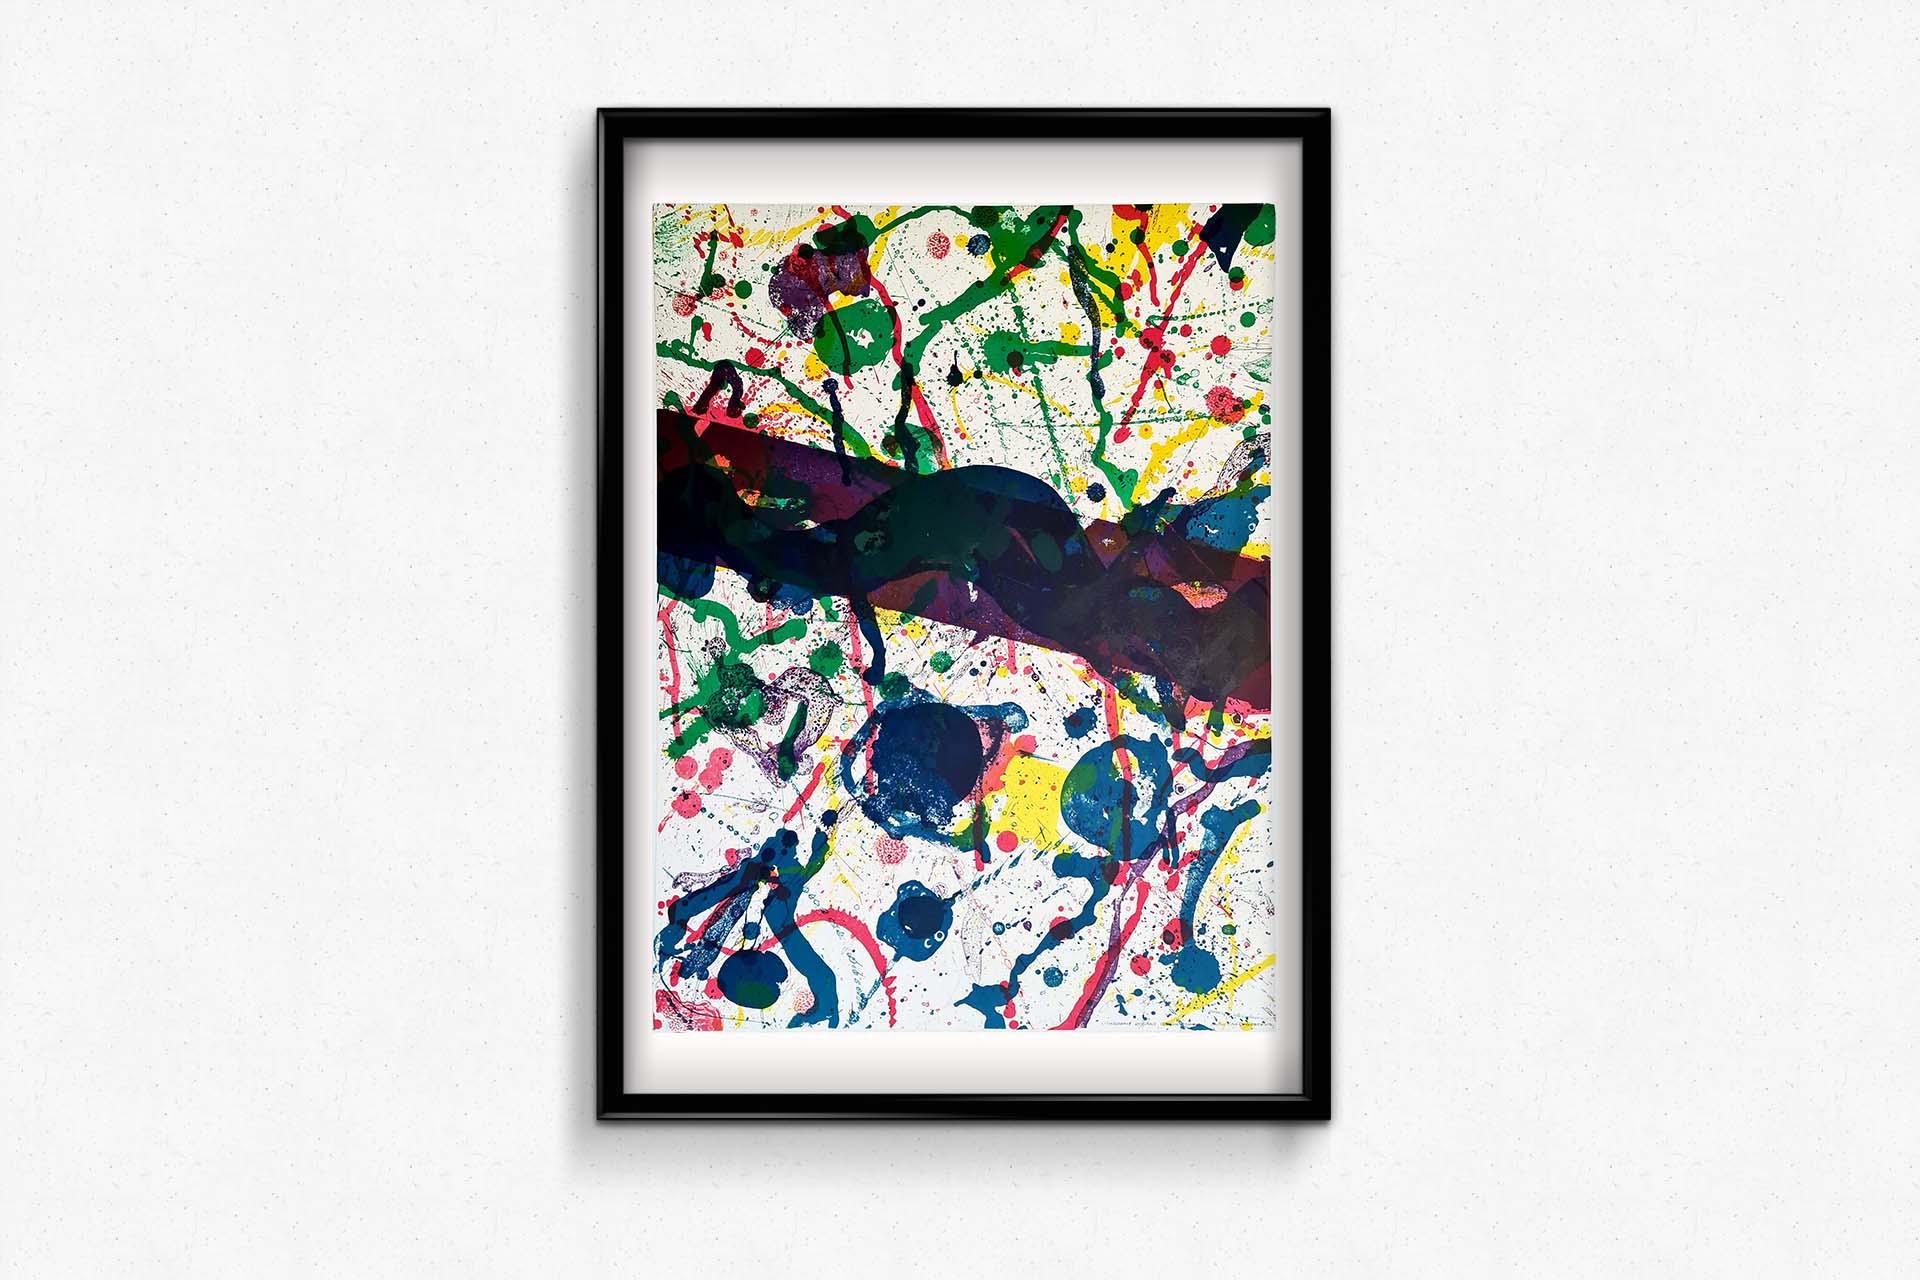 Very nice original lithograph of Sam Francis.

Samuel Lewis Francis (1923-1994) known as Sam Francis, is an American painter, famous for his non-figurative painting.

He developed in his paintings a new aesthetic of color, a new conception of the